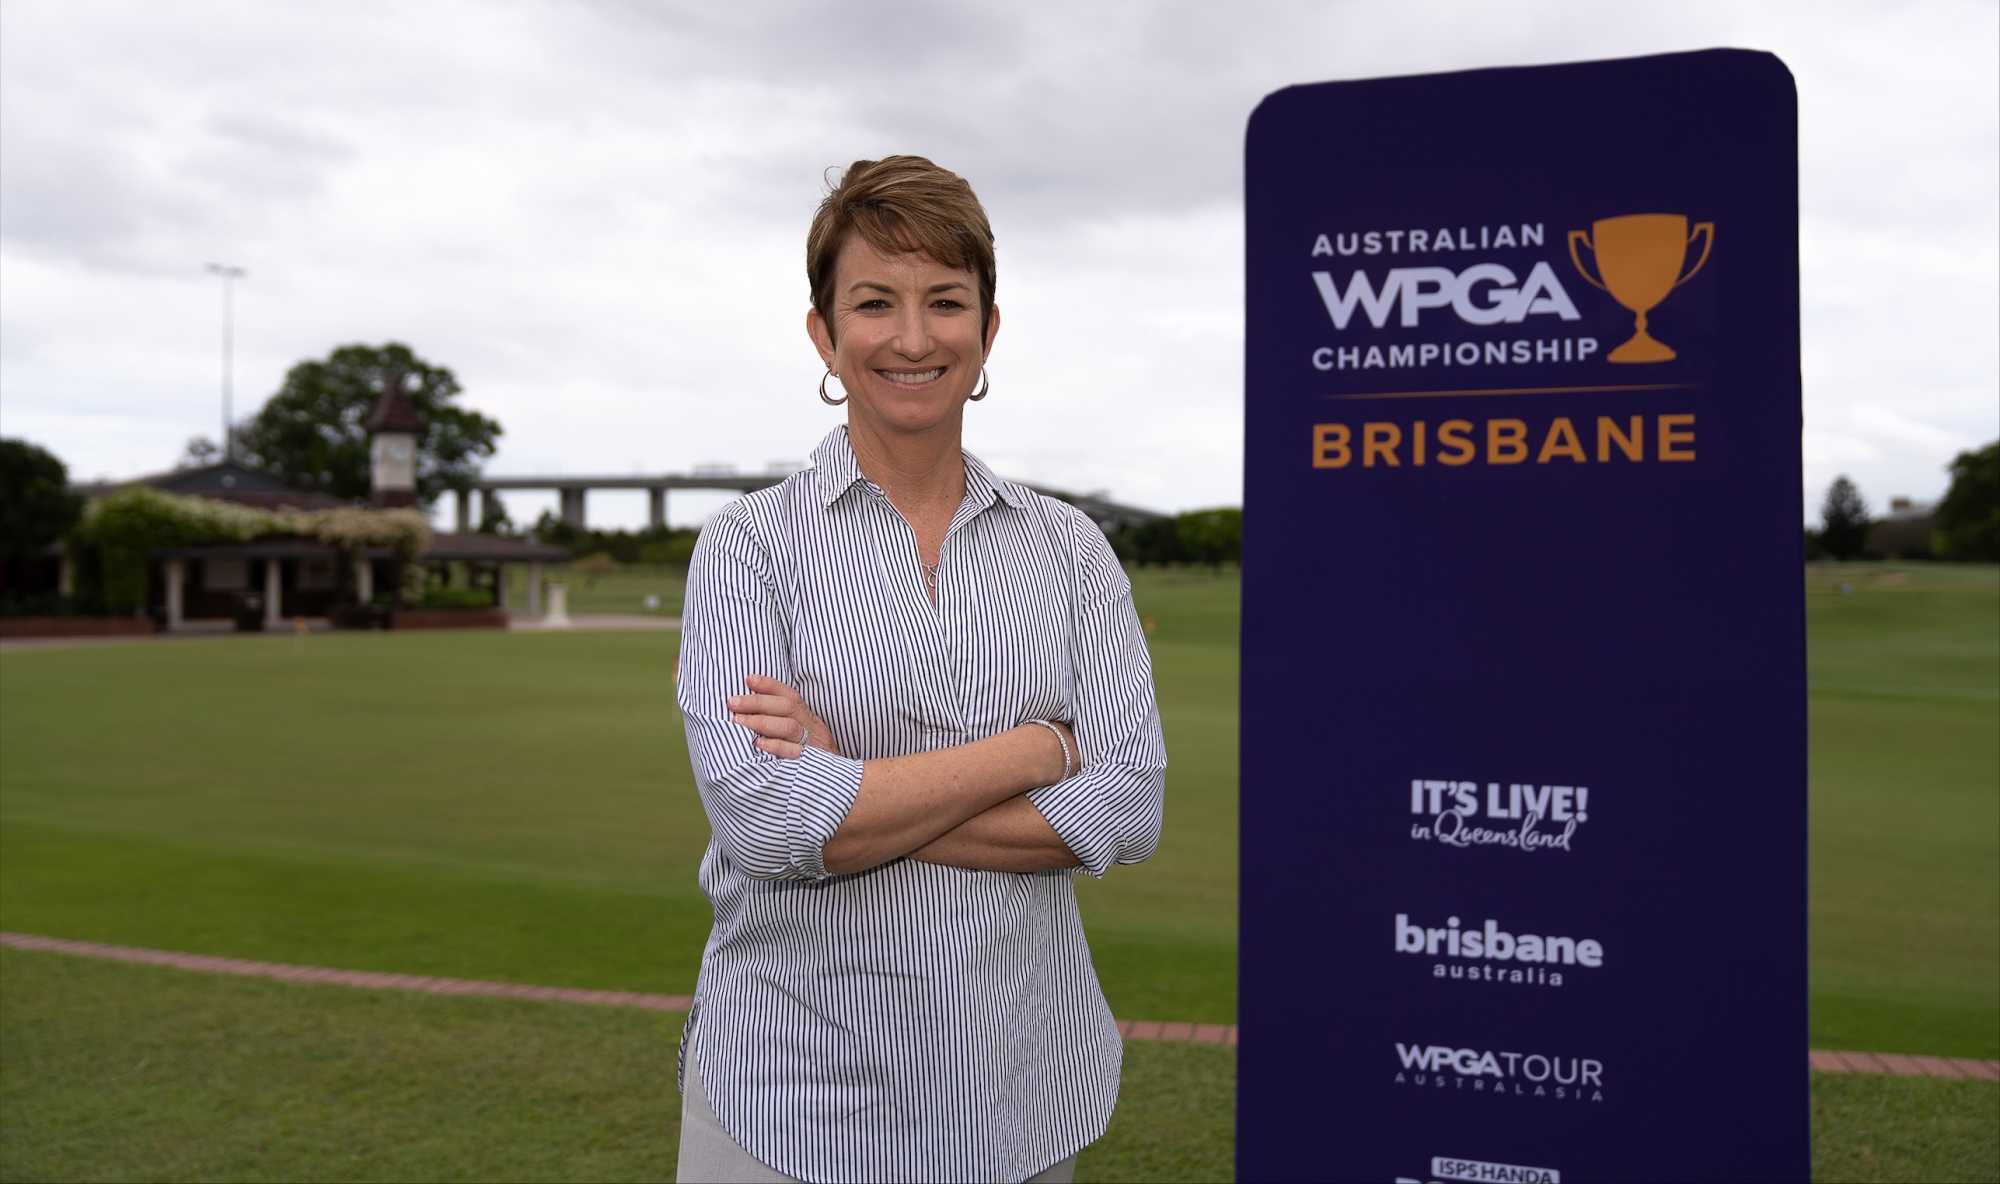 Karrie Webb at today's announcement at Royal Queensland Golf Club.